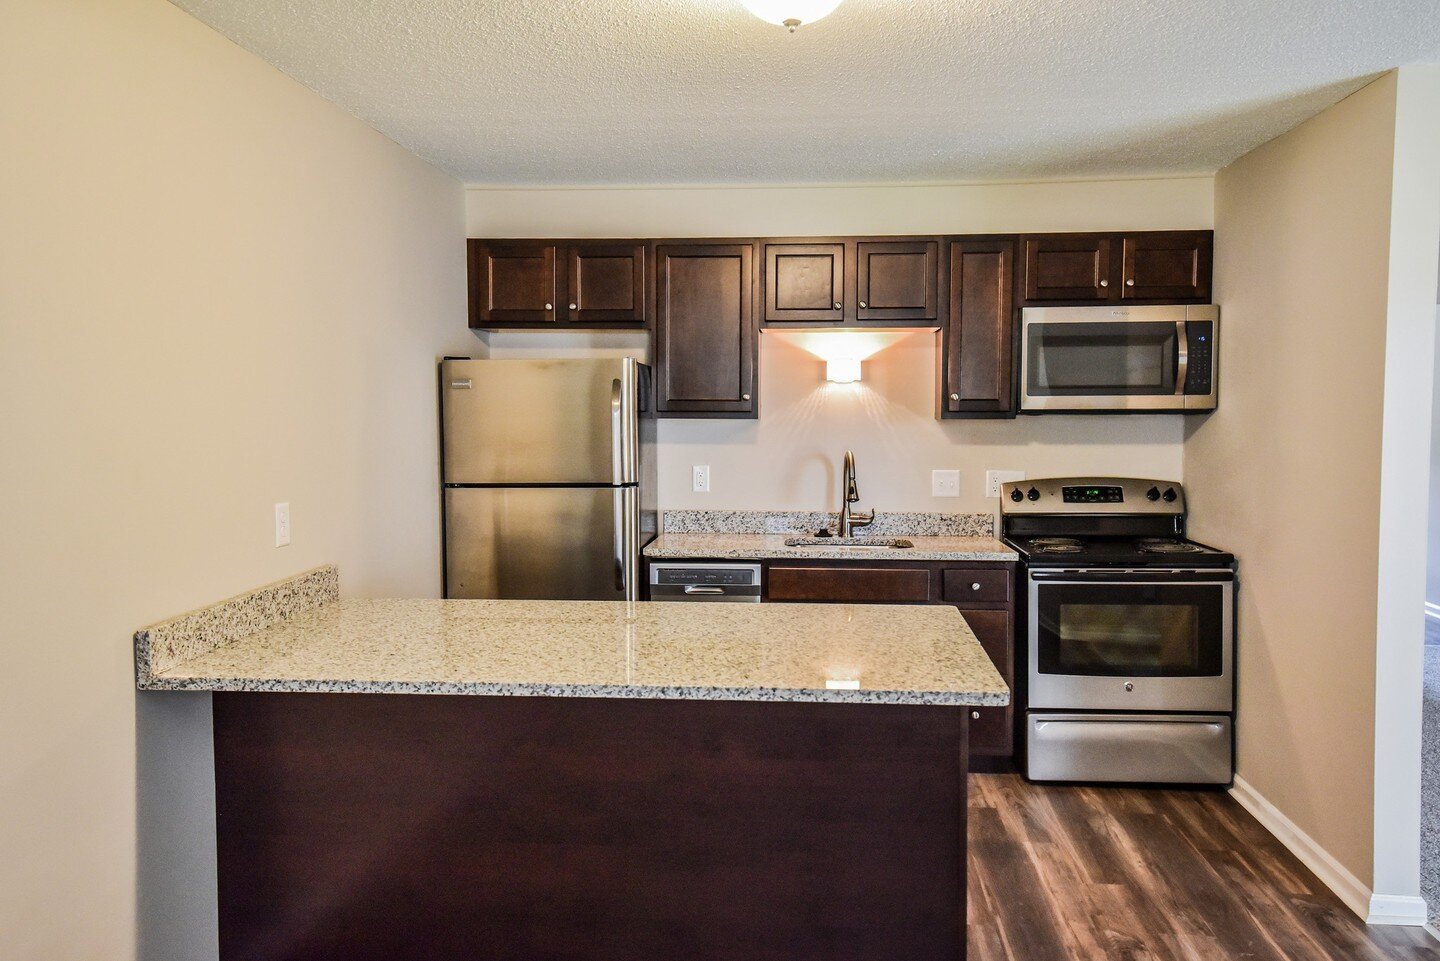 Put your chef-y skills to the test in our updated, spacious kitchens! 
Learn more: www.triphammerapts.com